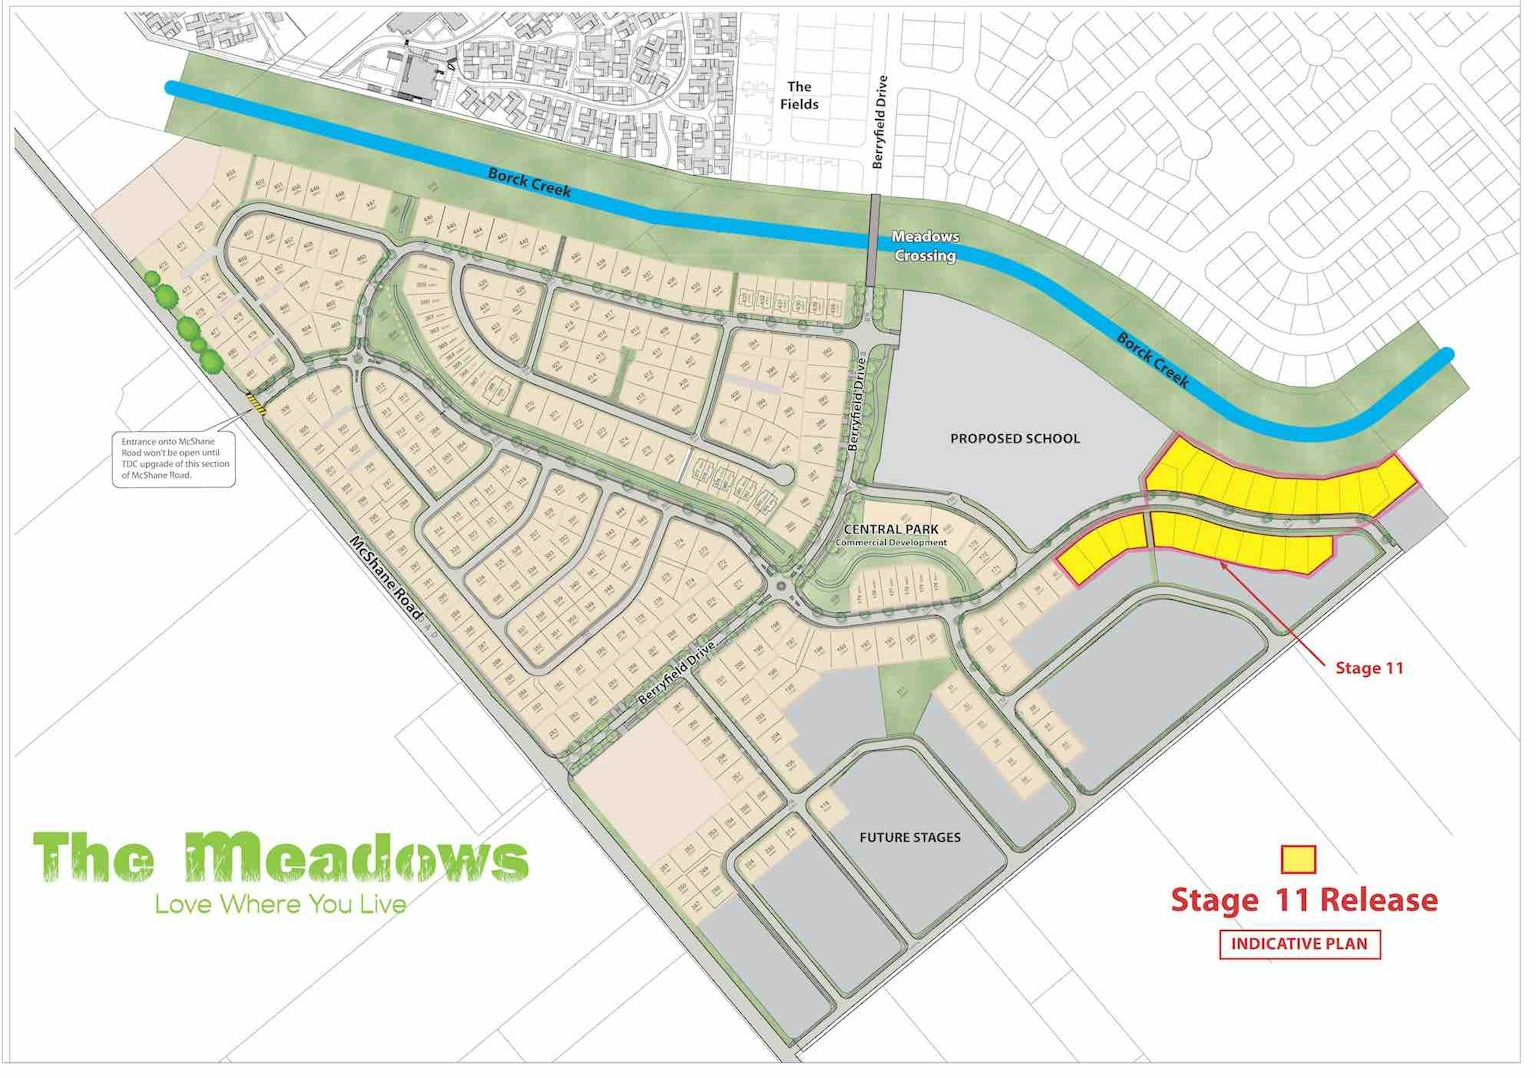 The Meadows stages image